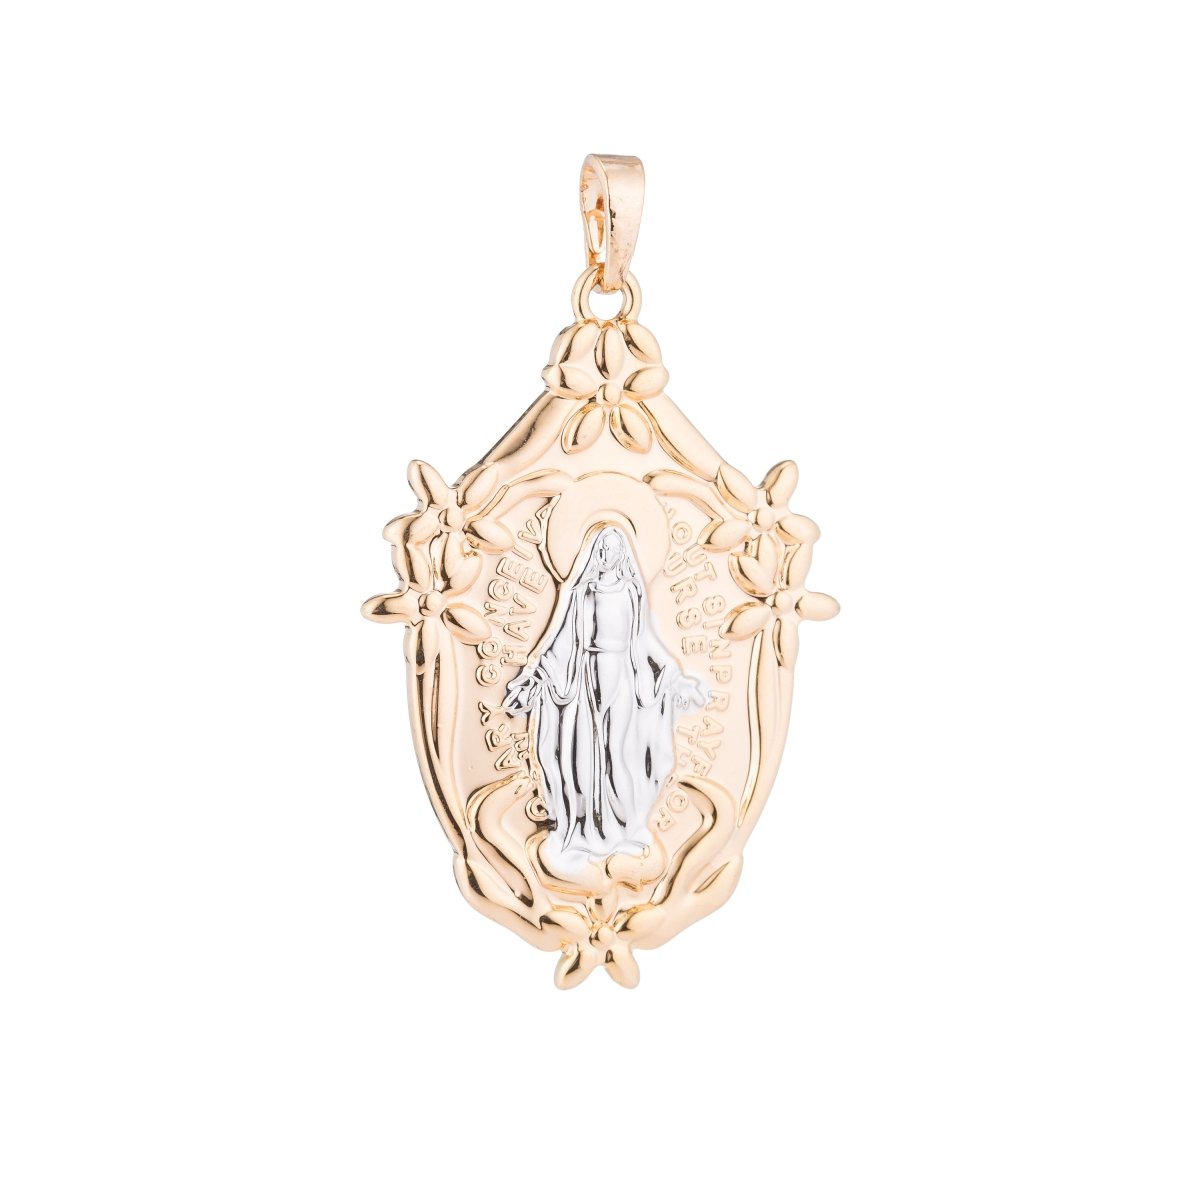 Gold Holy Virgin Mary, Mother of Jesus, Flower, Catholic Saint, Miraculous Necklace Pendant Charm Bead Bails Findings for Jewelry Making H-526 - DLUXCA